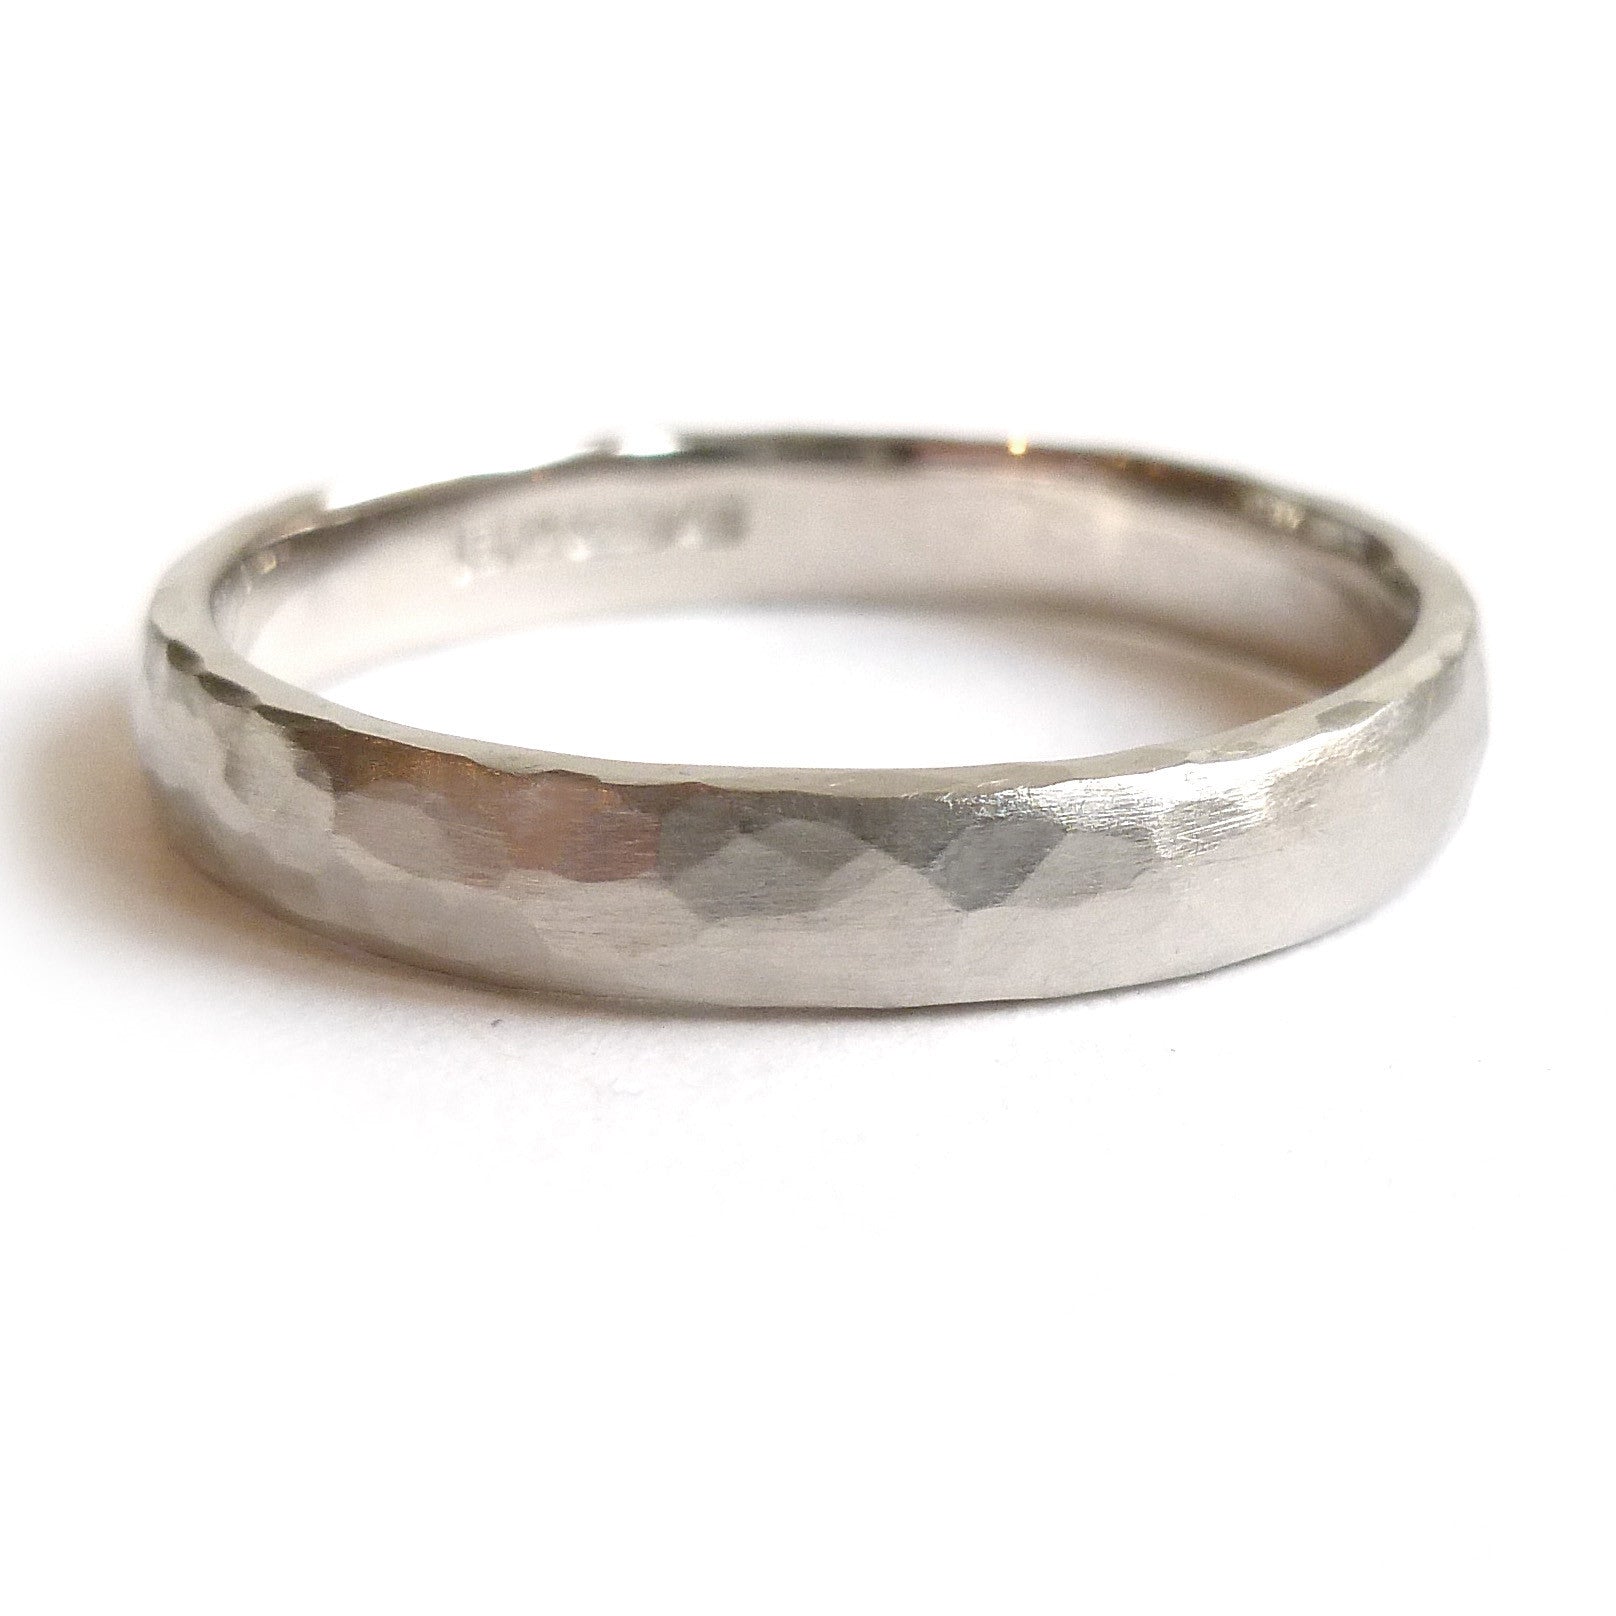 Contemporary, modern and bespoke hammered white gold wedding ring by designer maker Sue Lane Jewellery. Perfect wedding ring for men or women.